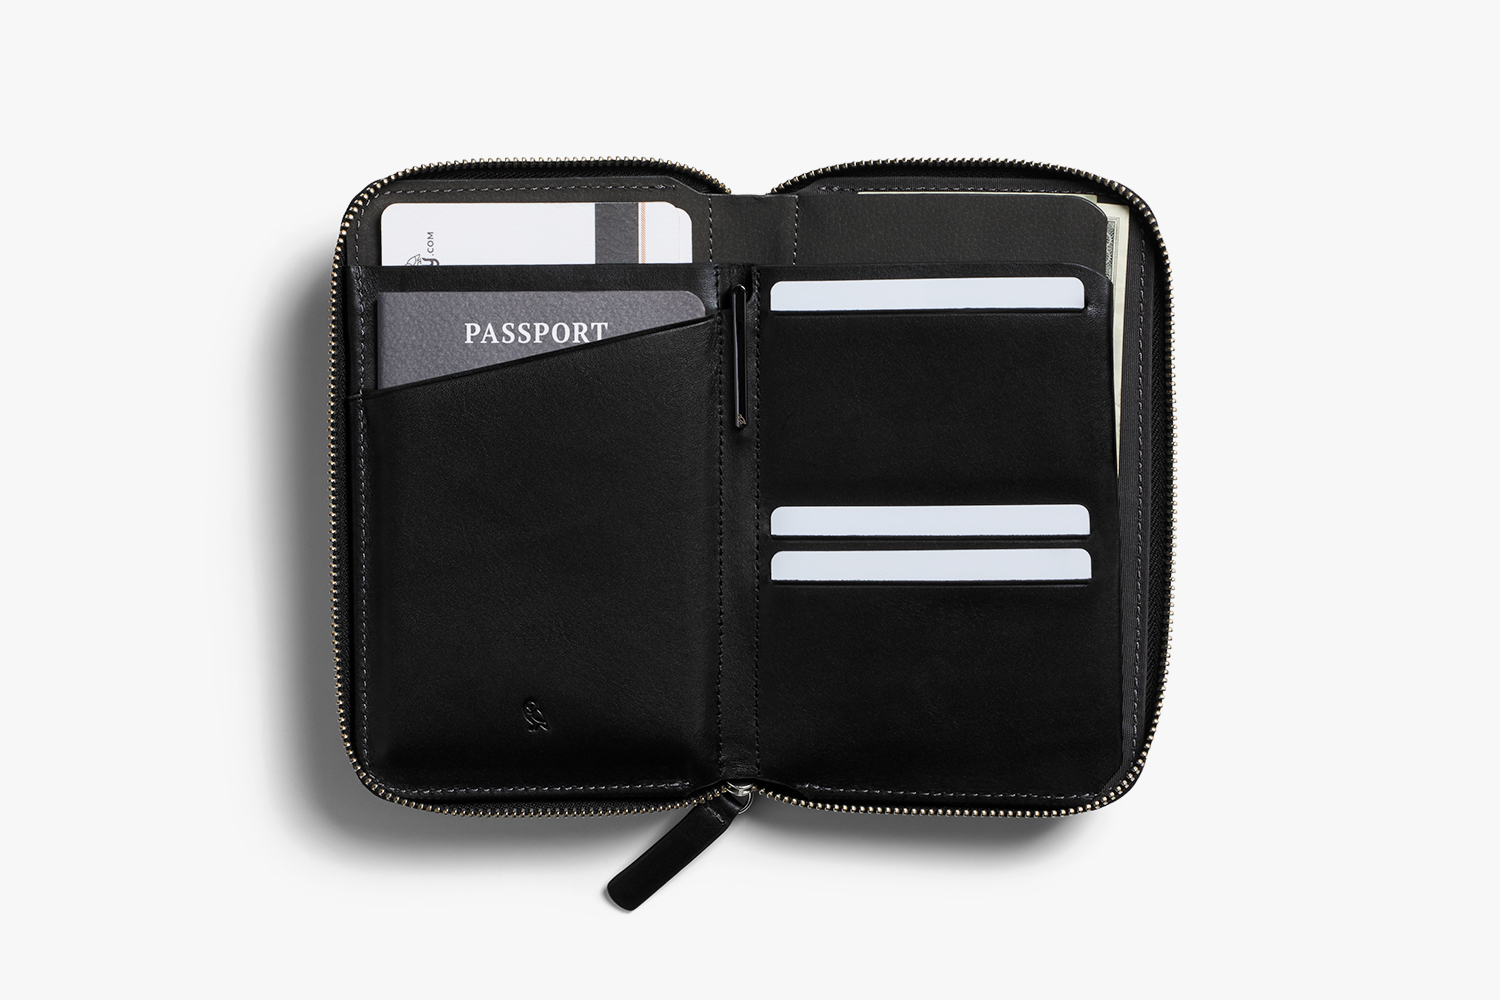 The Travel Folio by Bellroy.